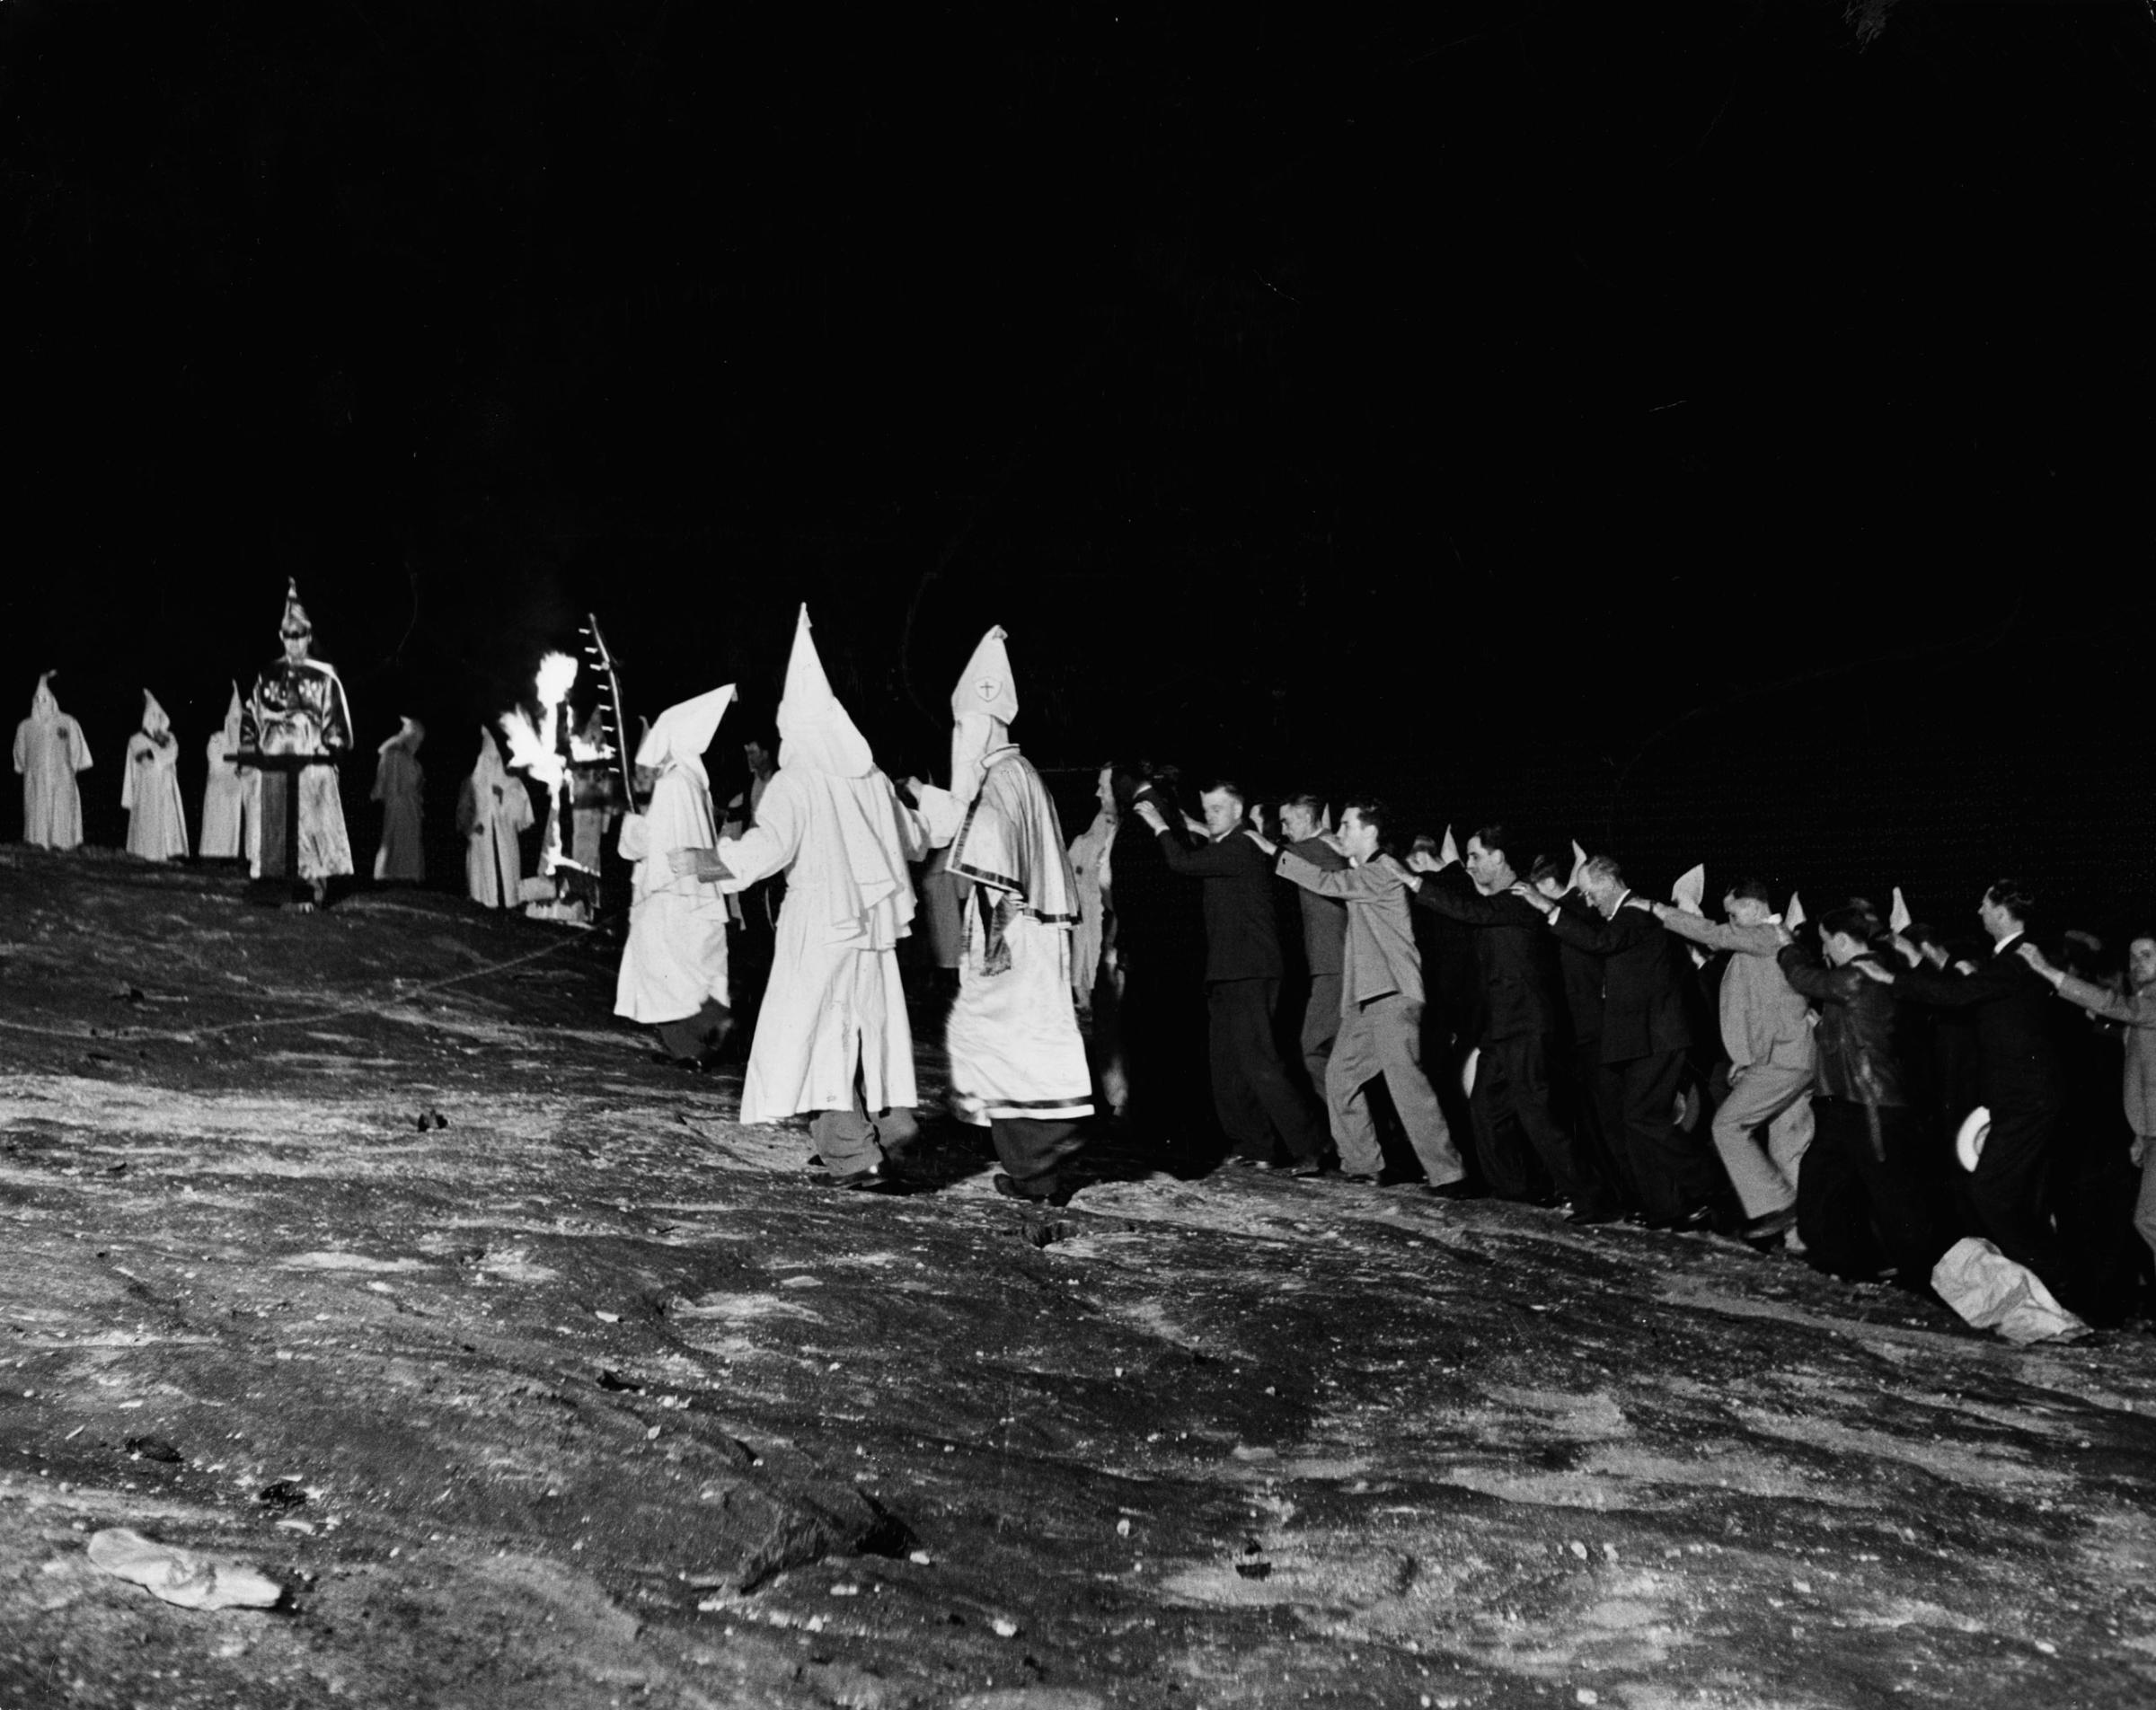 New Klan members march in lock step up to the Klan's big altar on Stone Mountain in Georgia, 1946. The Klan exultingly announced they had initiated 600 new members in one night; observers best guesses were from 150 to 200.